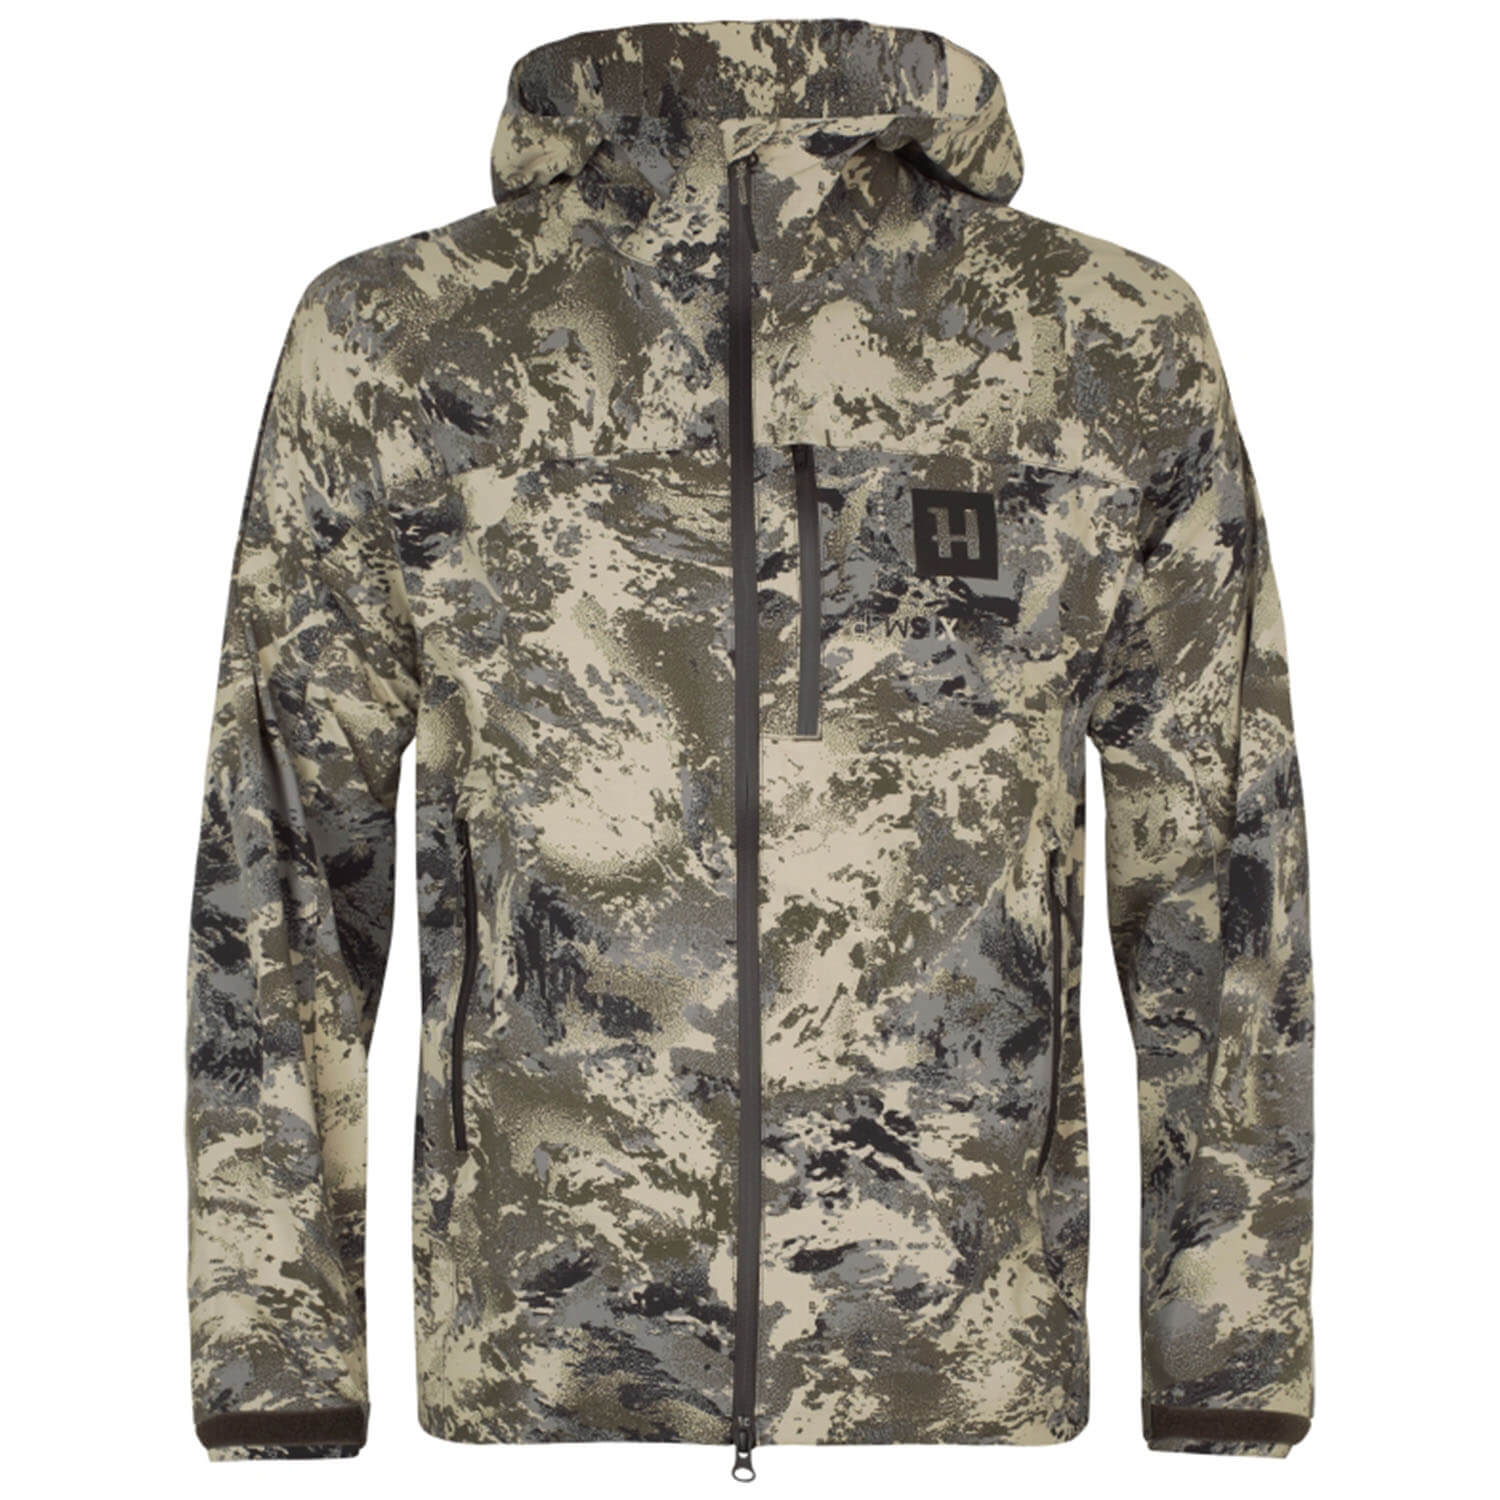 Härkila hunting jacket mountain hunter expedition packable - Camouflage Jackets